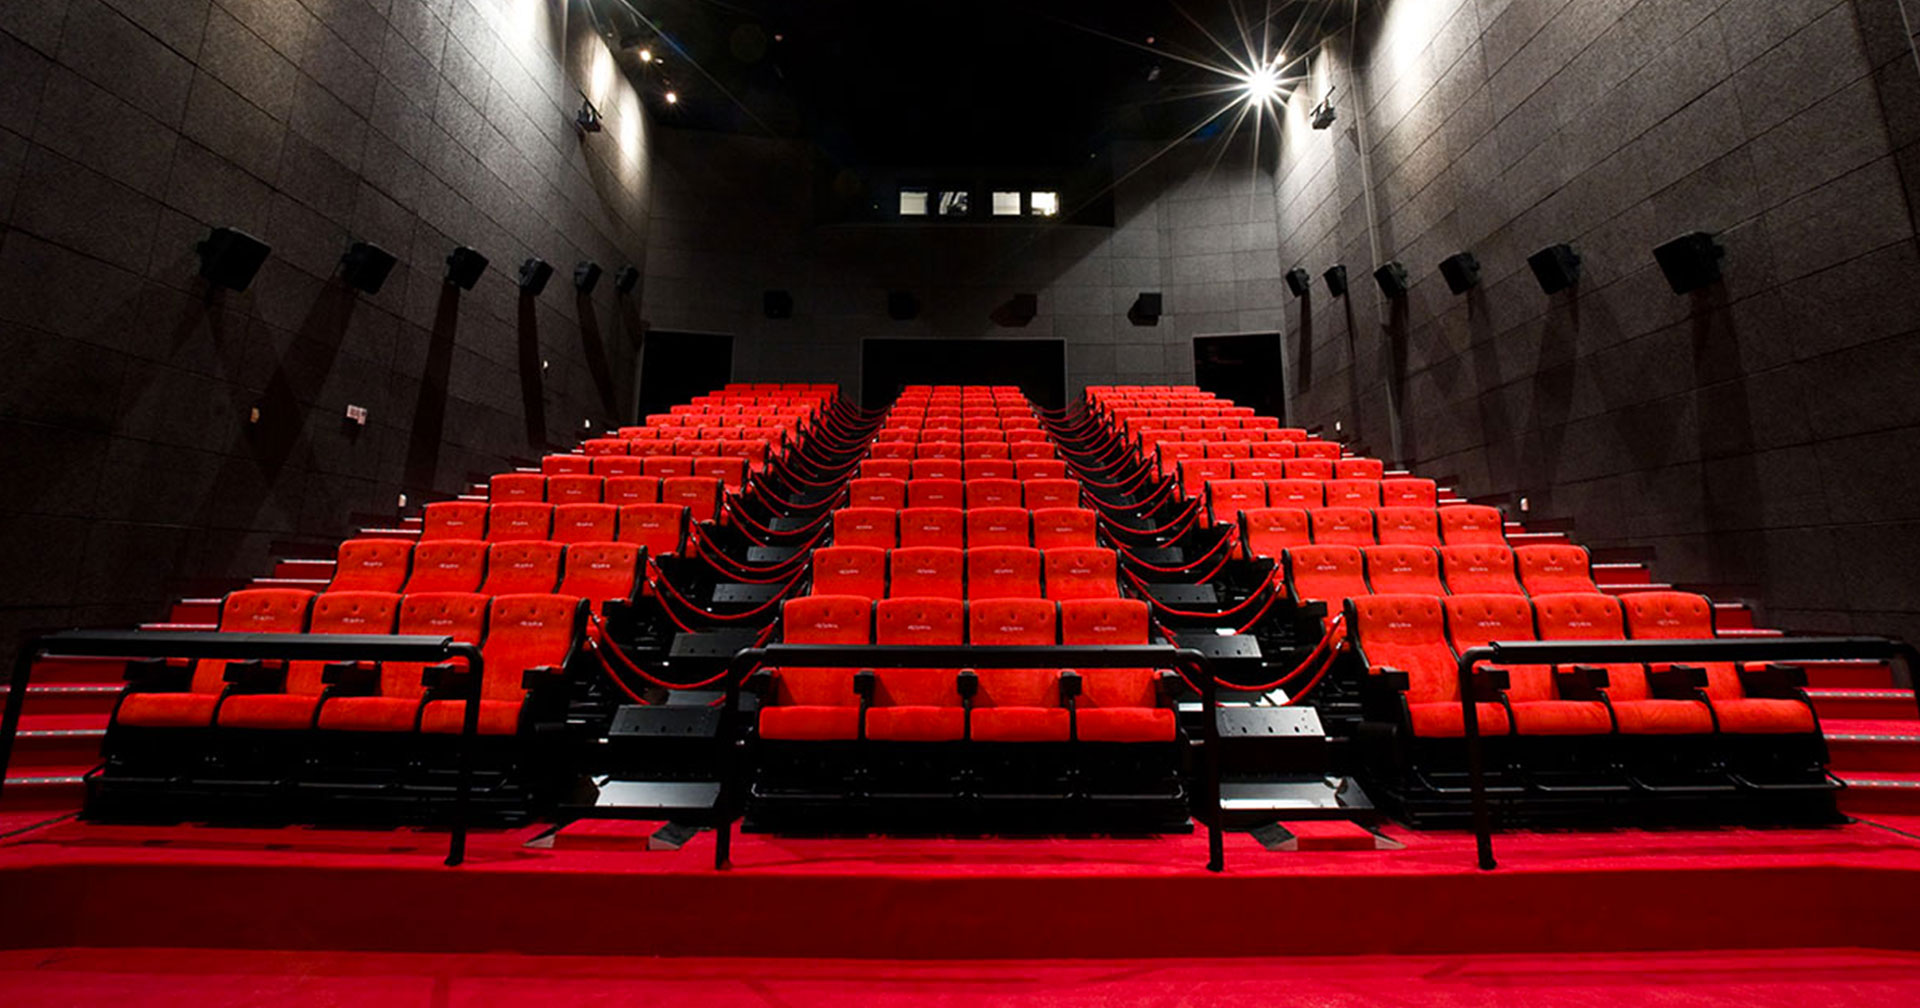 4d movies theaters in nyc